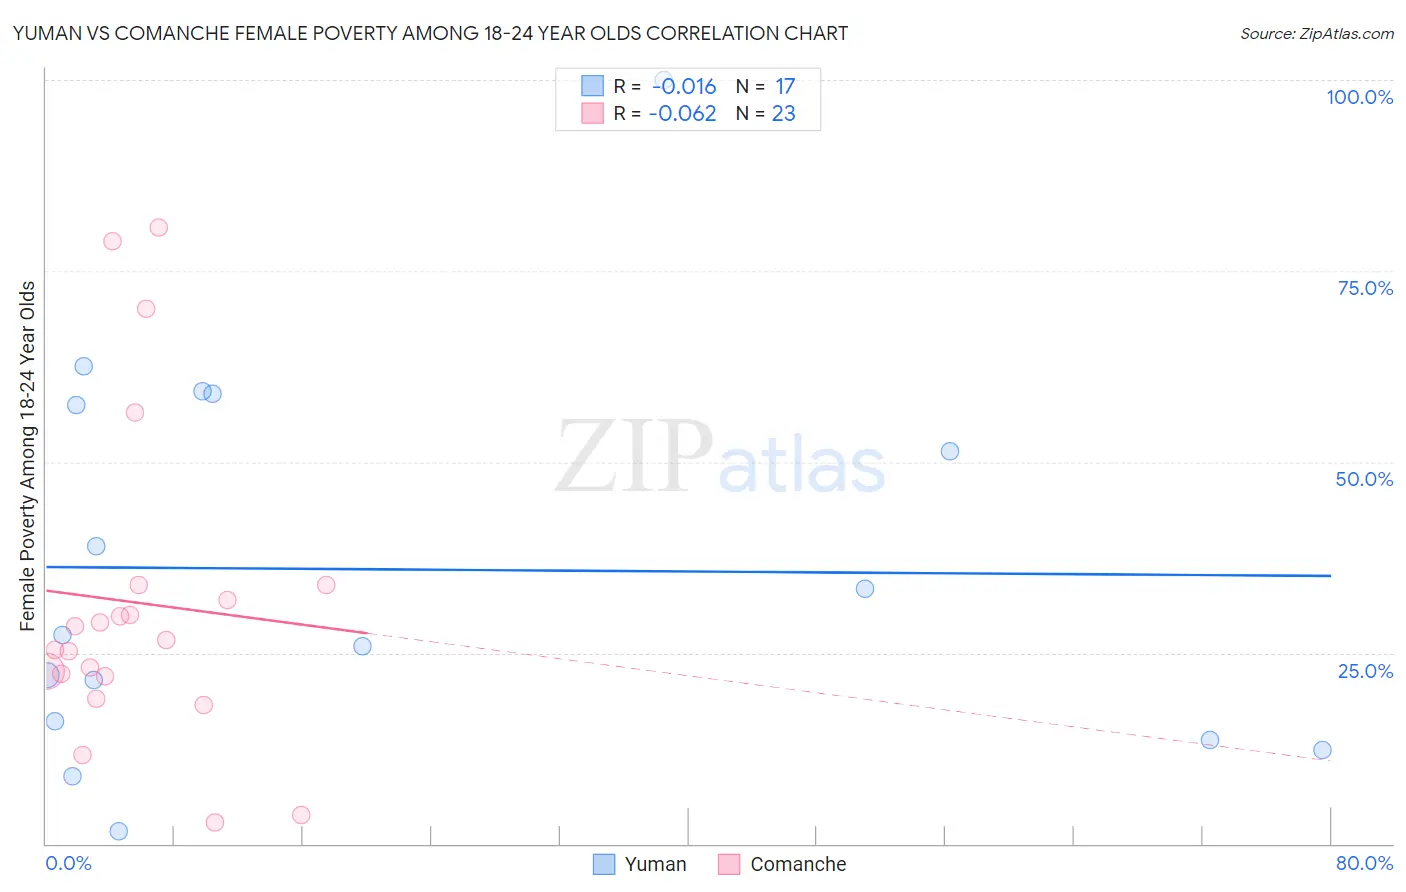 Yuman vs Comanche Female Poverty Among 18-24 Year Olds